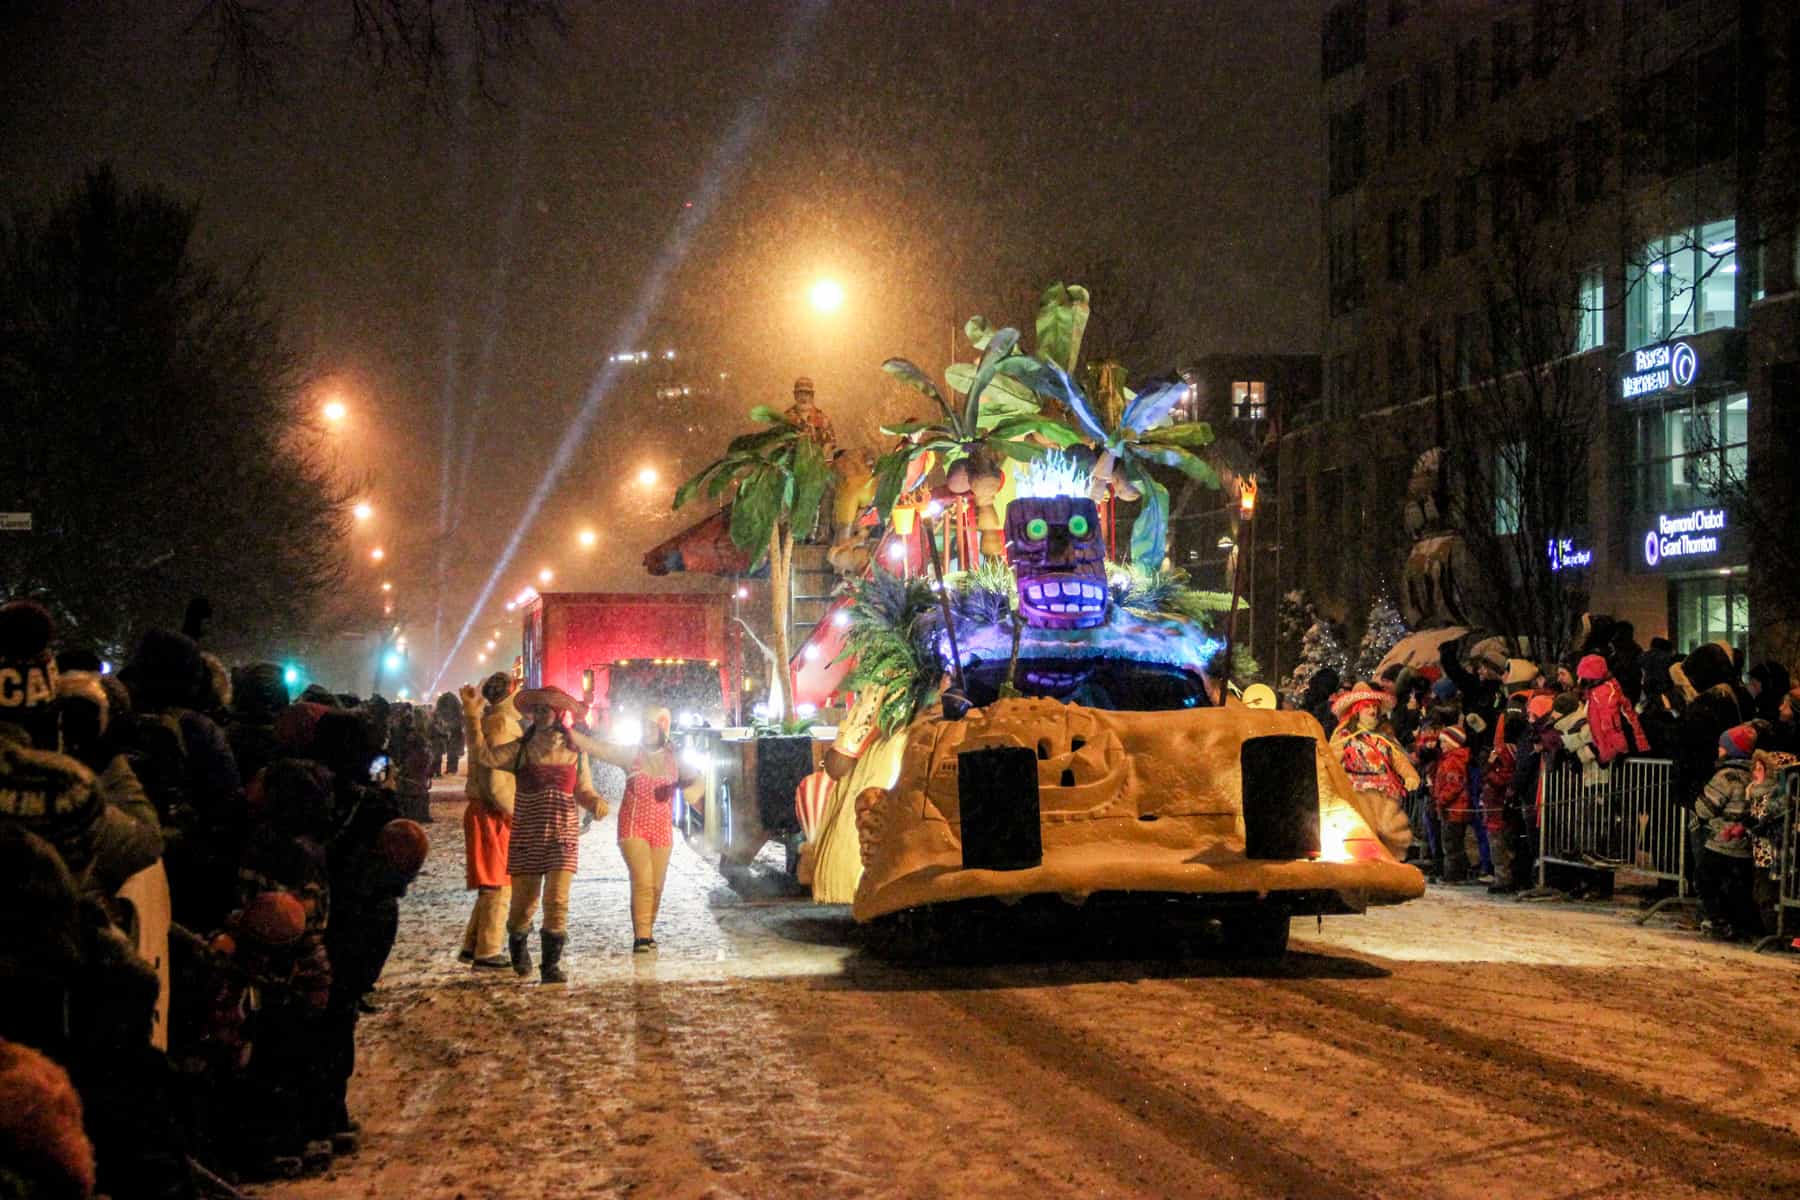 People line either side of the snow covered street watching a carnival parade and jungle themed float, in Quebec city in winter.